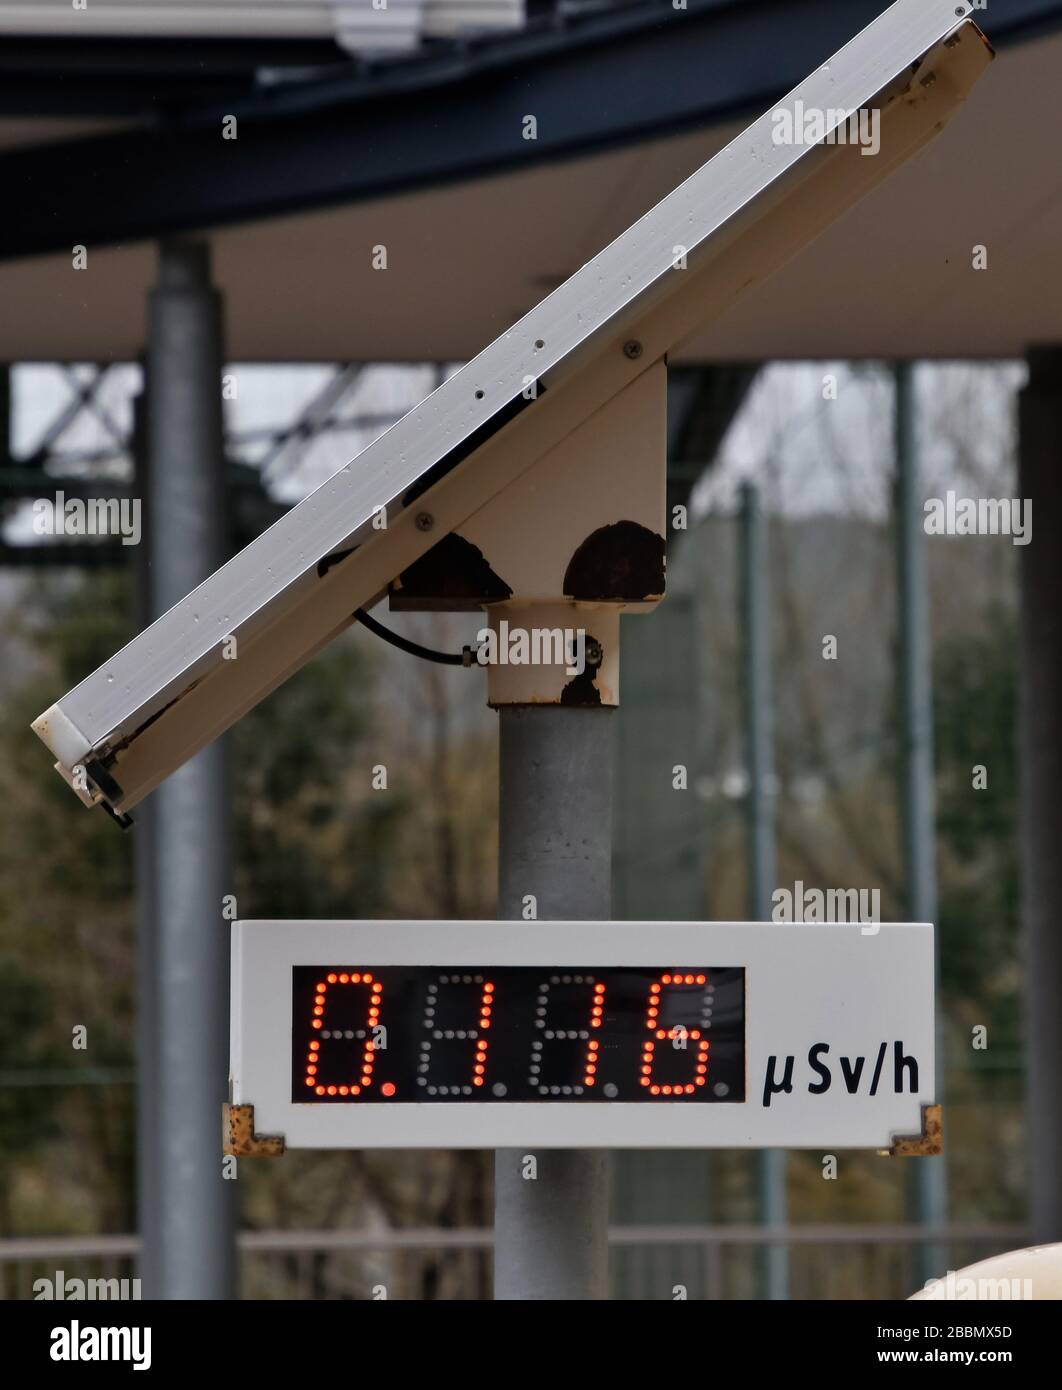 Naraha, Japan. 01st Apr, 2020. A radiation dosimeter is seen sitting outside of the National Training Centre J-Village in Naraha-town, Fukushima Prefecture, Japan on Wednesday, April 1, 2020. J-Village was used base for responding Fukushima Daiichi nuclear Power Plant accidents from March 15, 2011 to June 30, 2013. Photo by Keizo Mori/UPI Credit: UPI/Alamy Live News Stock Photo